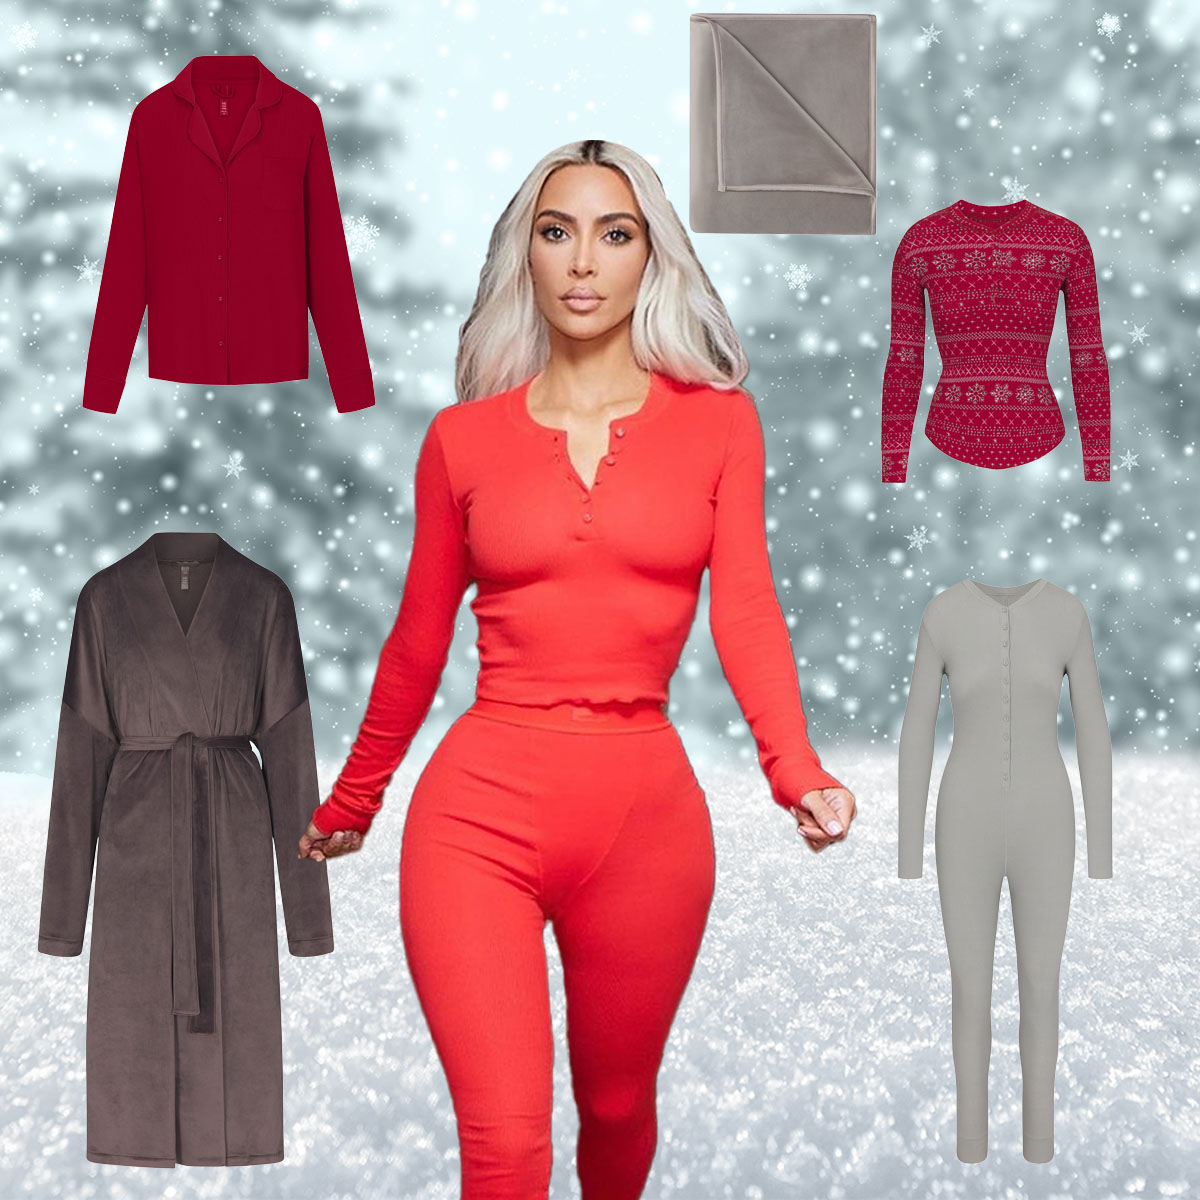 Kim Kardashian Leaves Little to the Imagination As She Promotes These  Sparkling Holiday SKIMS Lingerie Sets